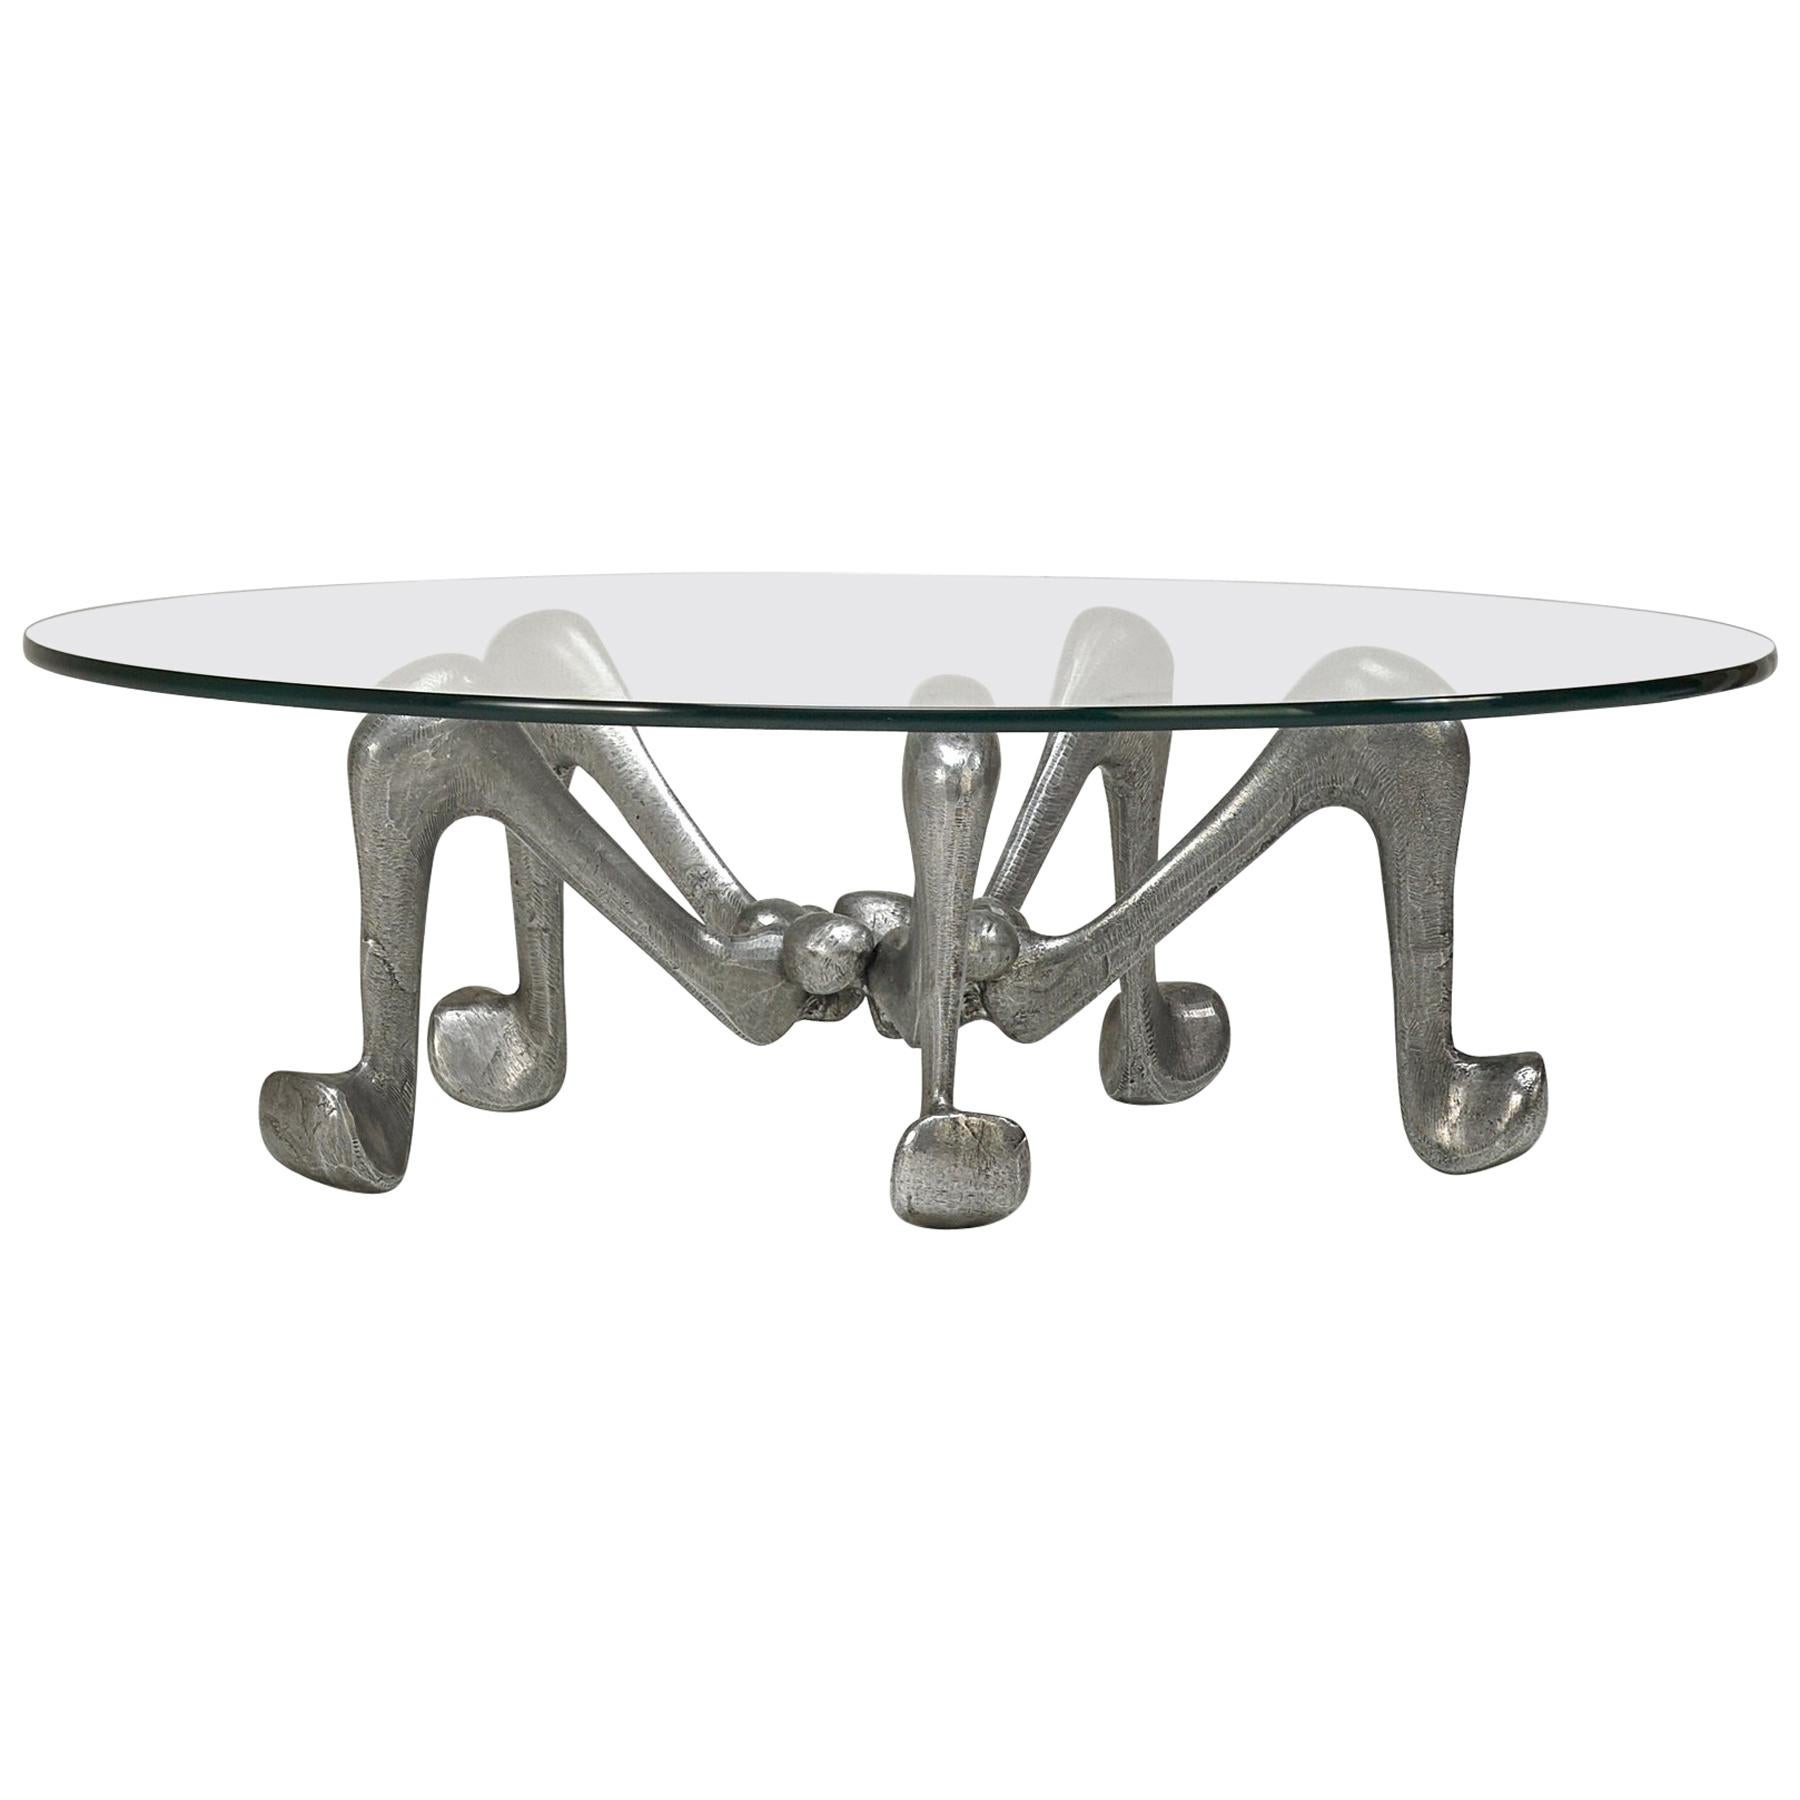  Aschenputtel in Paradise Cocktail table. Chicago, 2018. Patinated Cast Aluminum-Magnesium and Glass.
Provenance: Collection of the artist. Signed.
Measurements; 36 